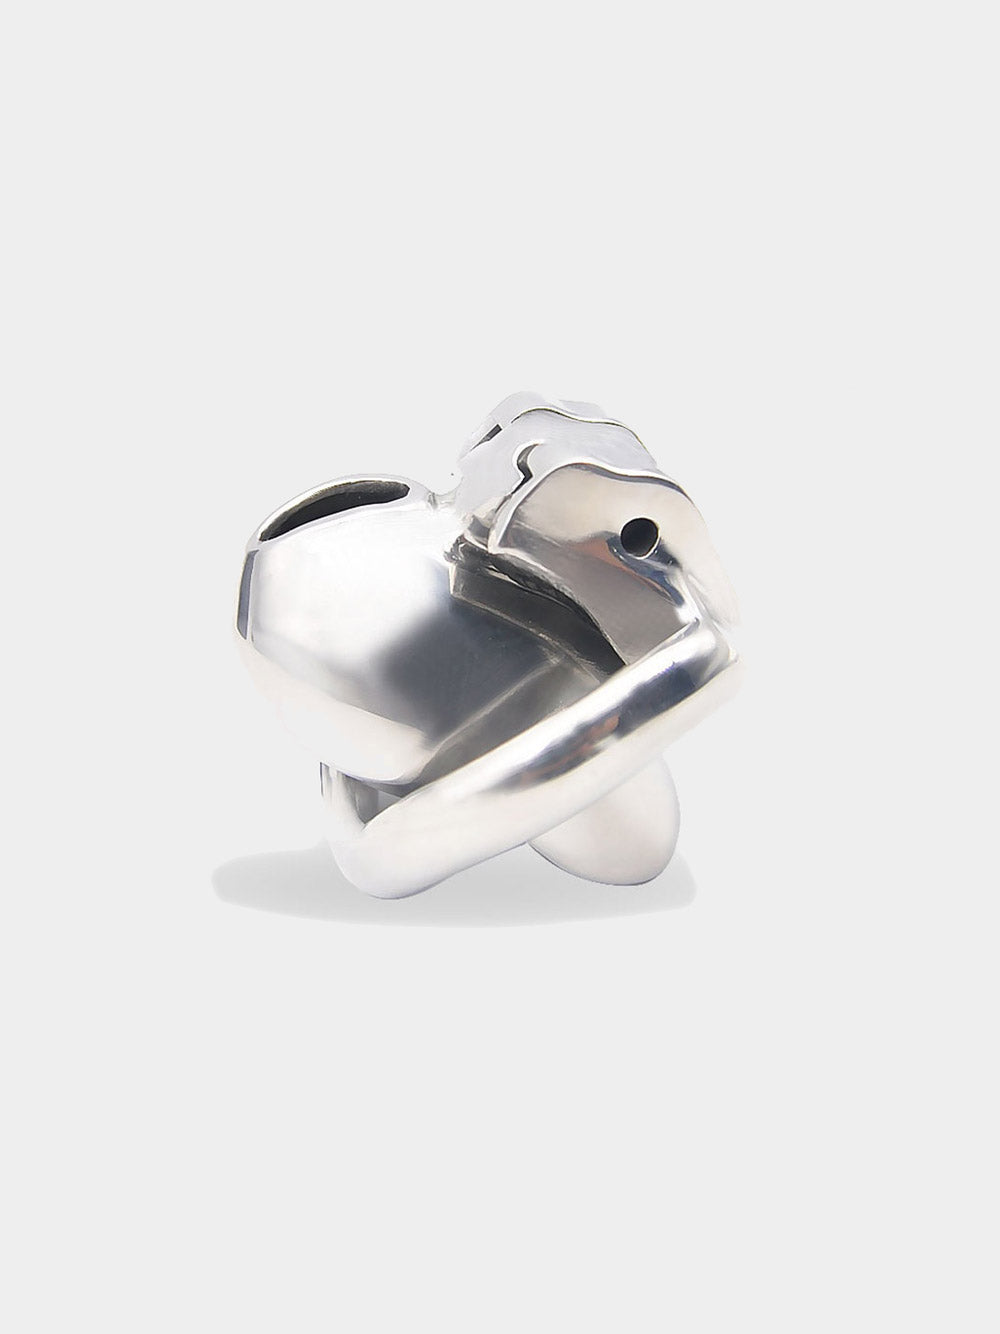 The famous nub chastity cage in steel